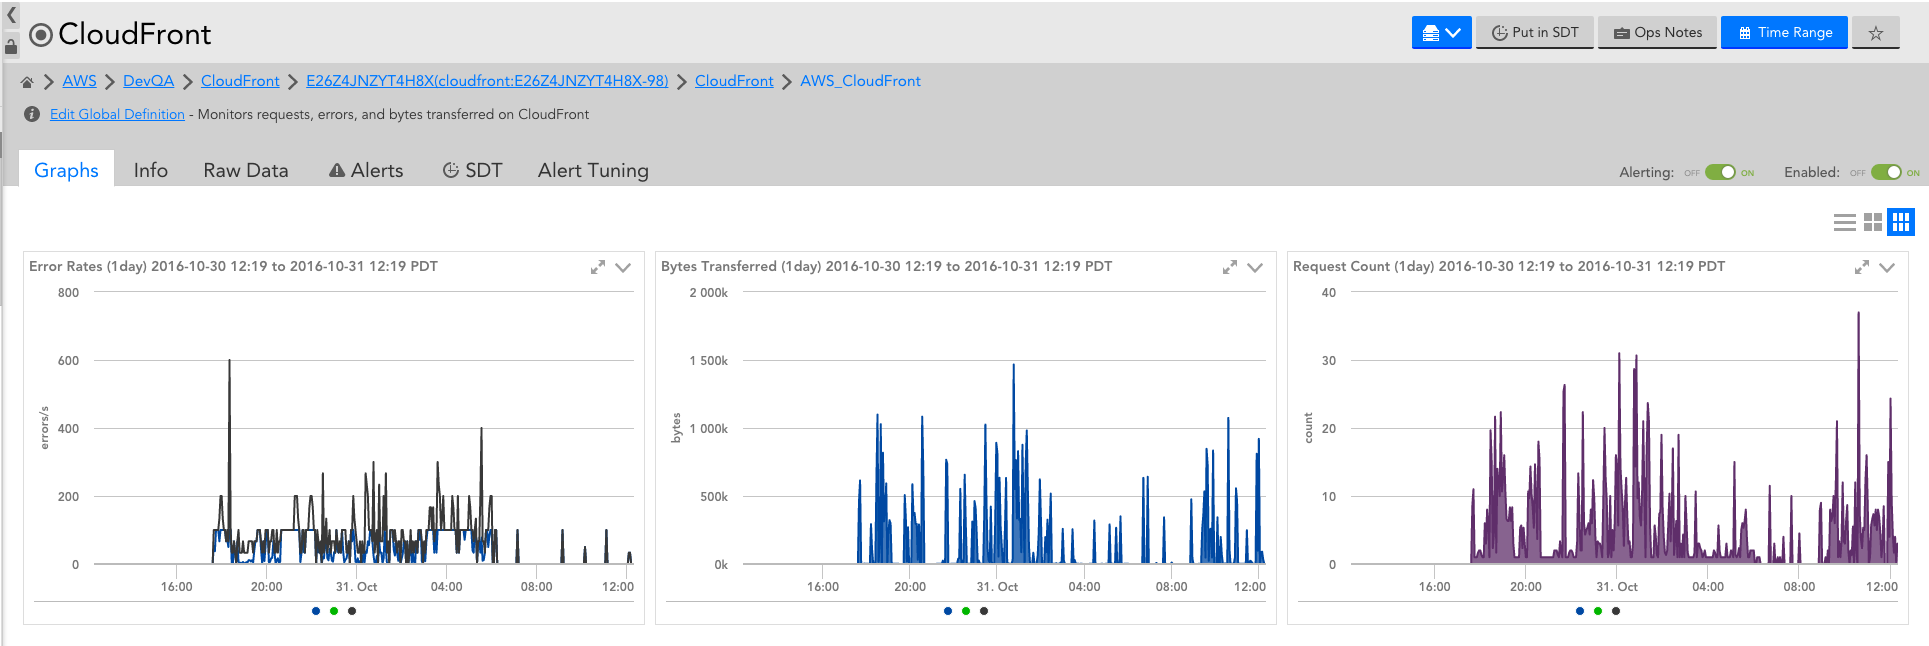 CLOUDFRONT MONITORING